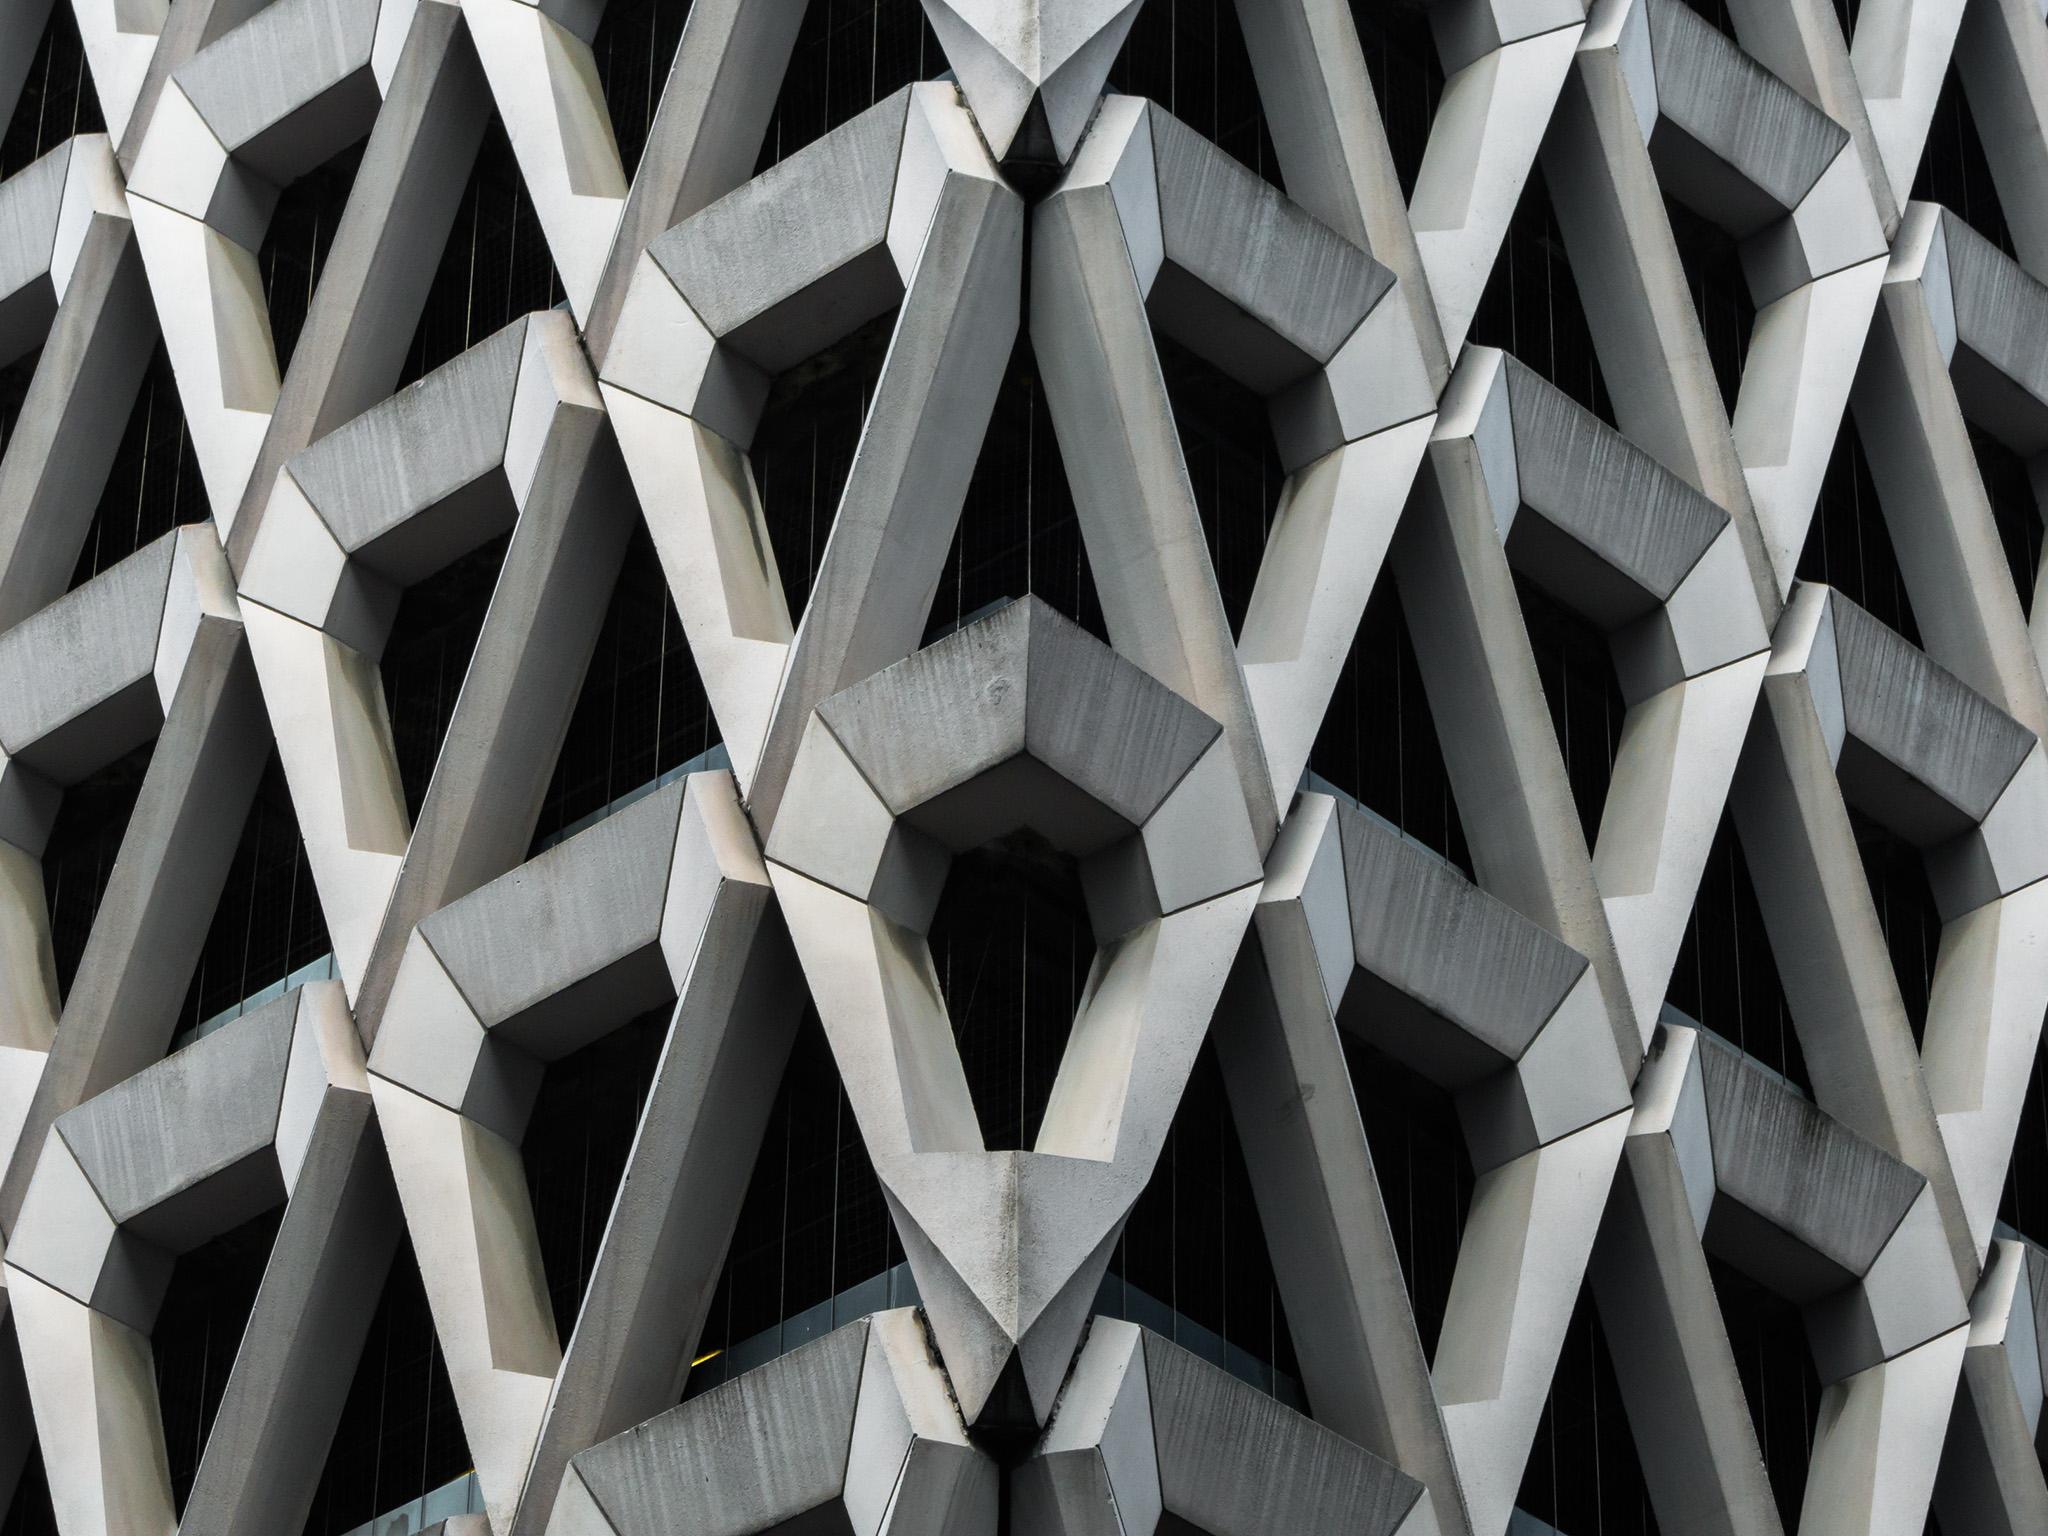 The brutalist concrete diamond-shaped facade of the car park in Welbeck Street, Marylebone, London